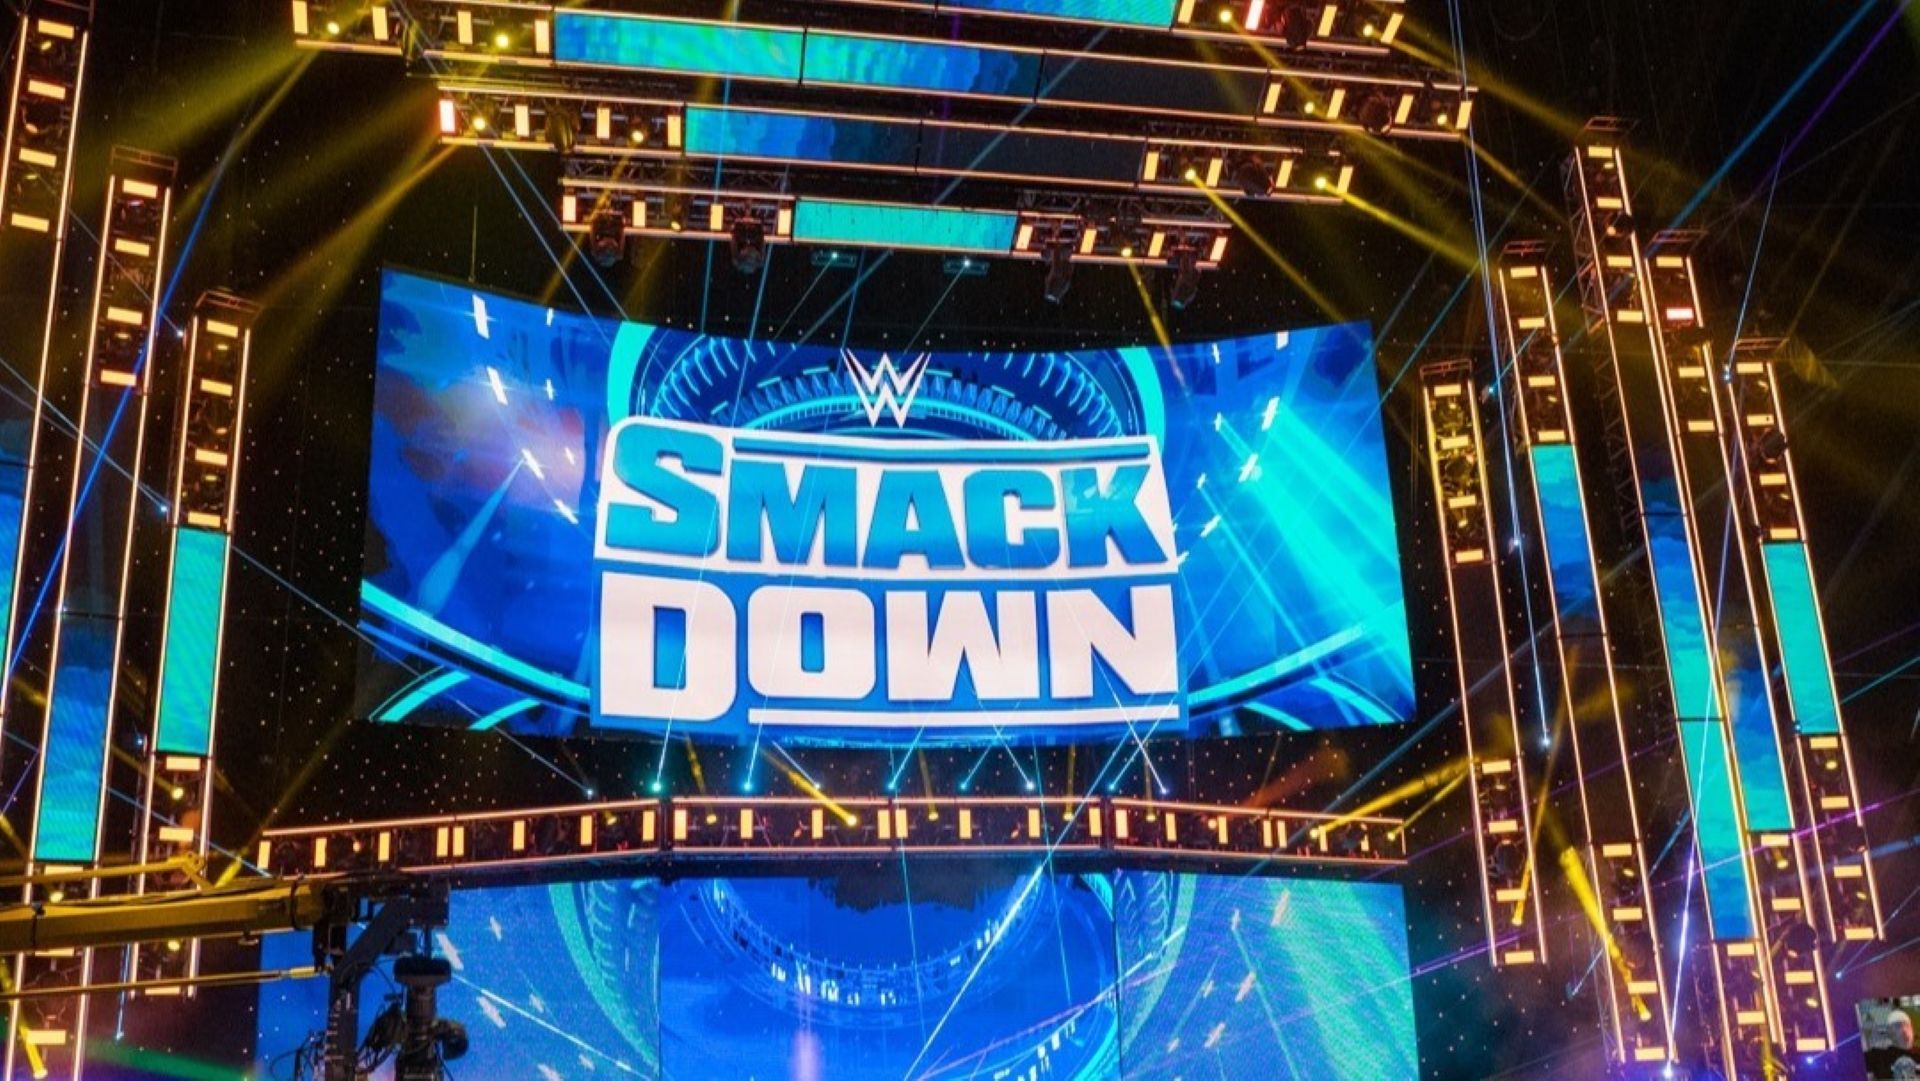 Business picked up on WWE SmackDown this week.